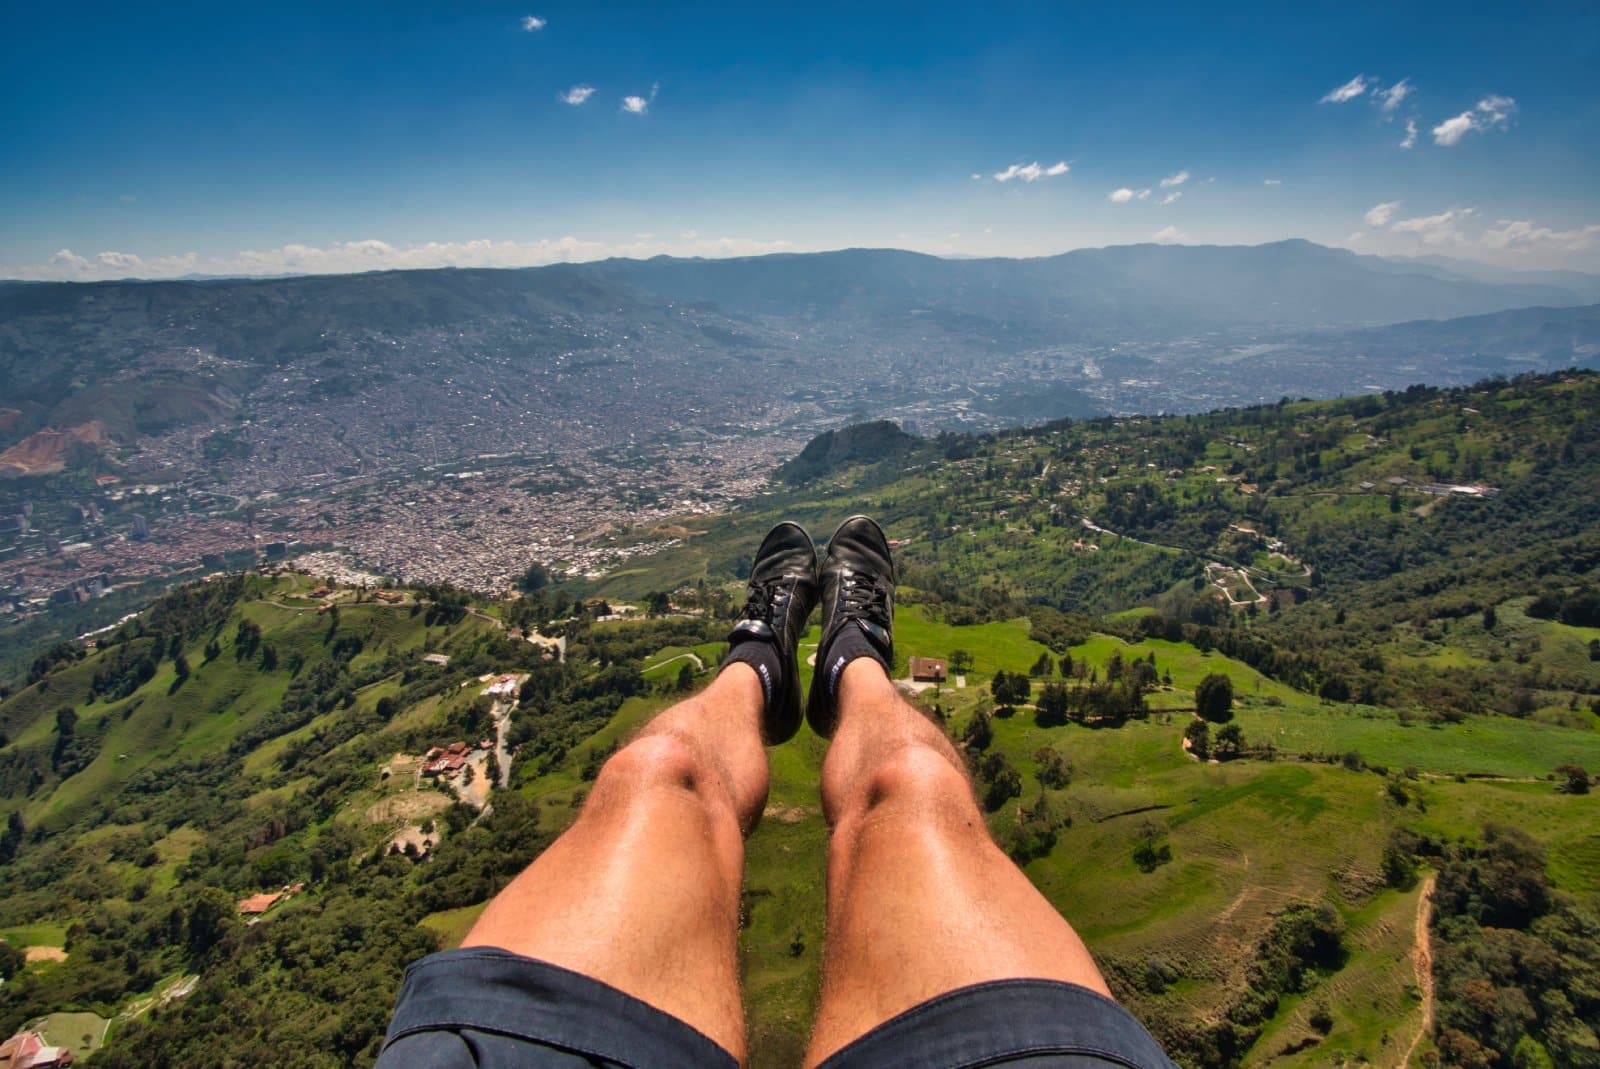 <p class="wp-caption-text">Image Credit: Shutterstock / Rico Markus</p>  <p>Soar high above the cityscape of Medellín on an exhilarating hang gliding flight. Launch from the scenic hills surrounding the city and enjoy panoramic views of the Andes Mountains as you glide effortlessly through the air like a modern-day condor.</p>